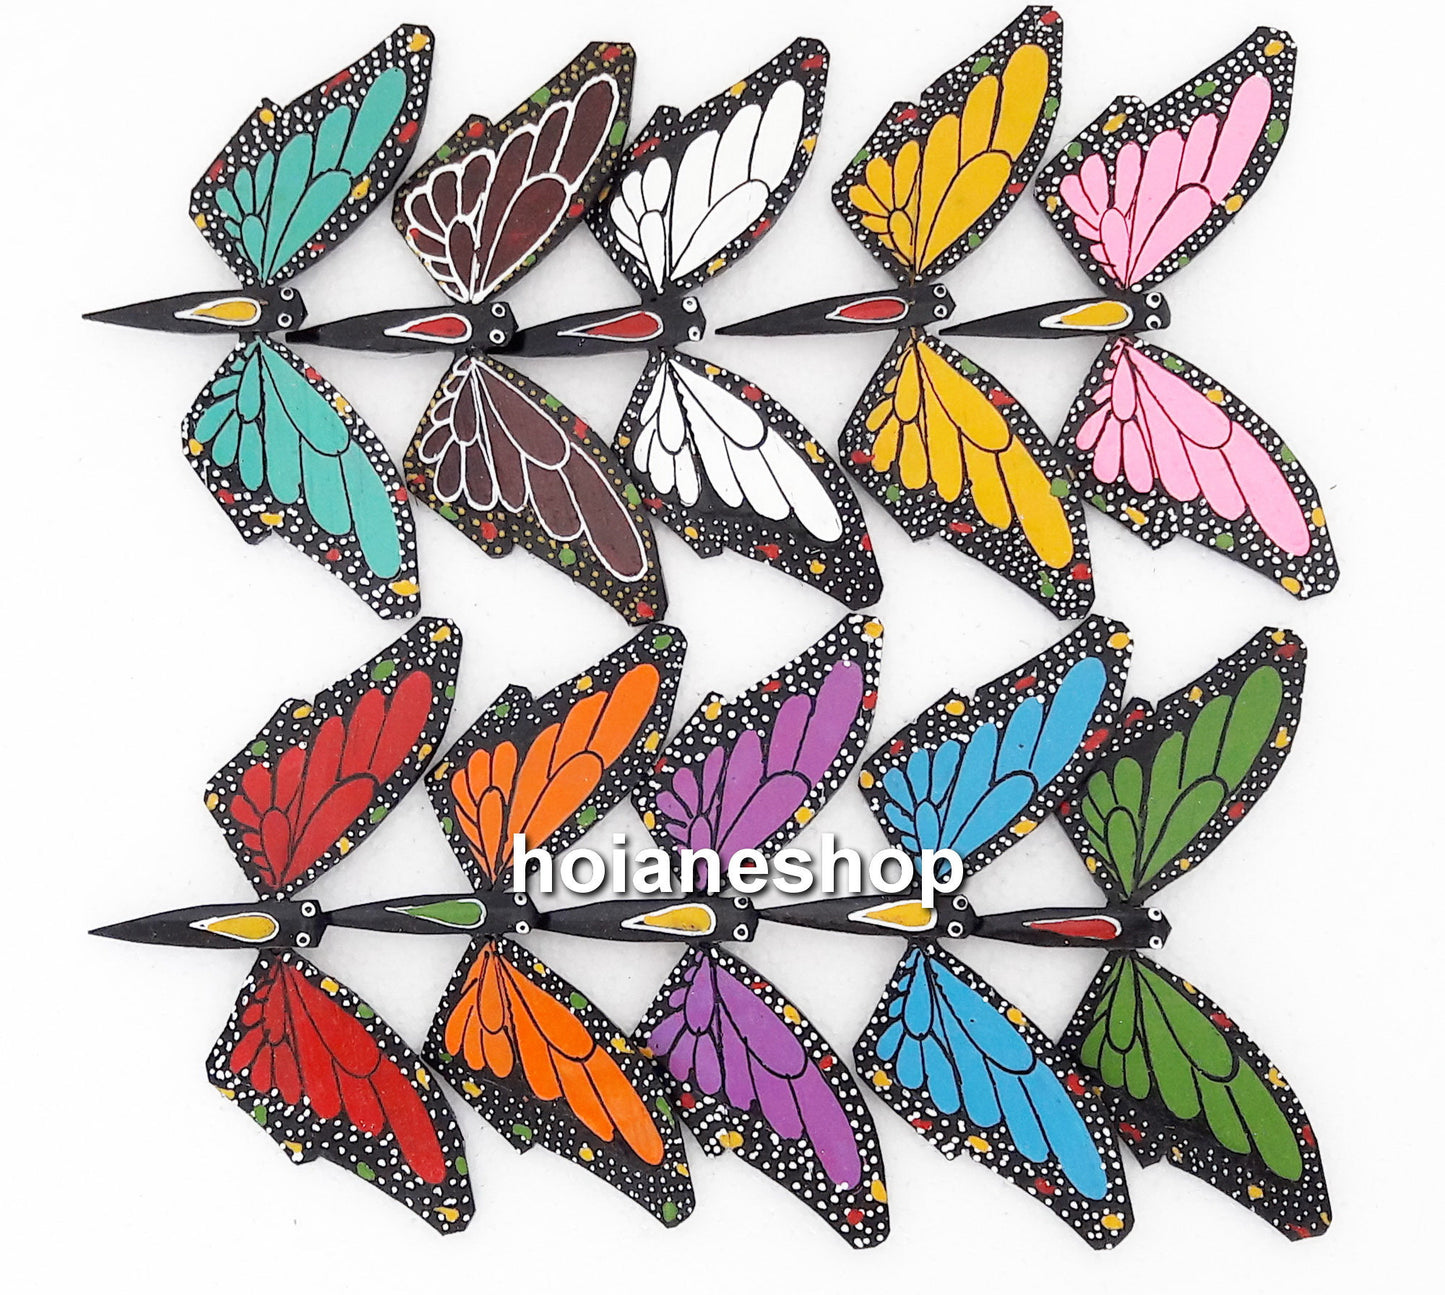 Lot of 50 pcs Bamboo butterfly - Hand painted with many colors - Gift for children, wedding gifts, gifts for mom, gifts for baby